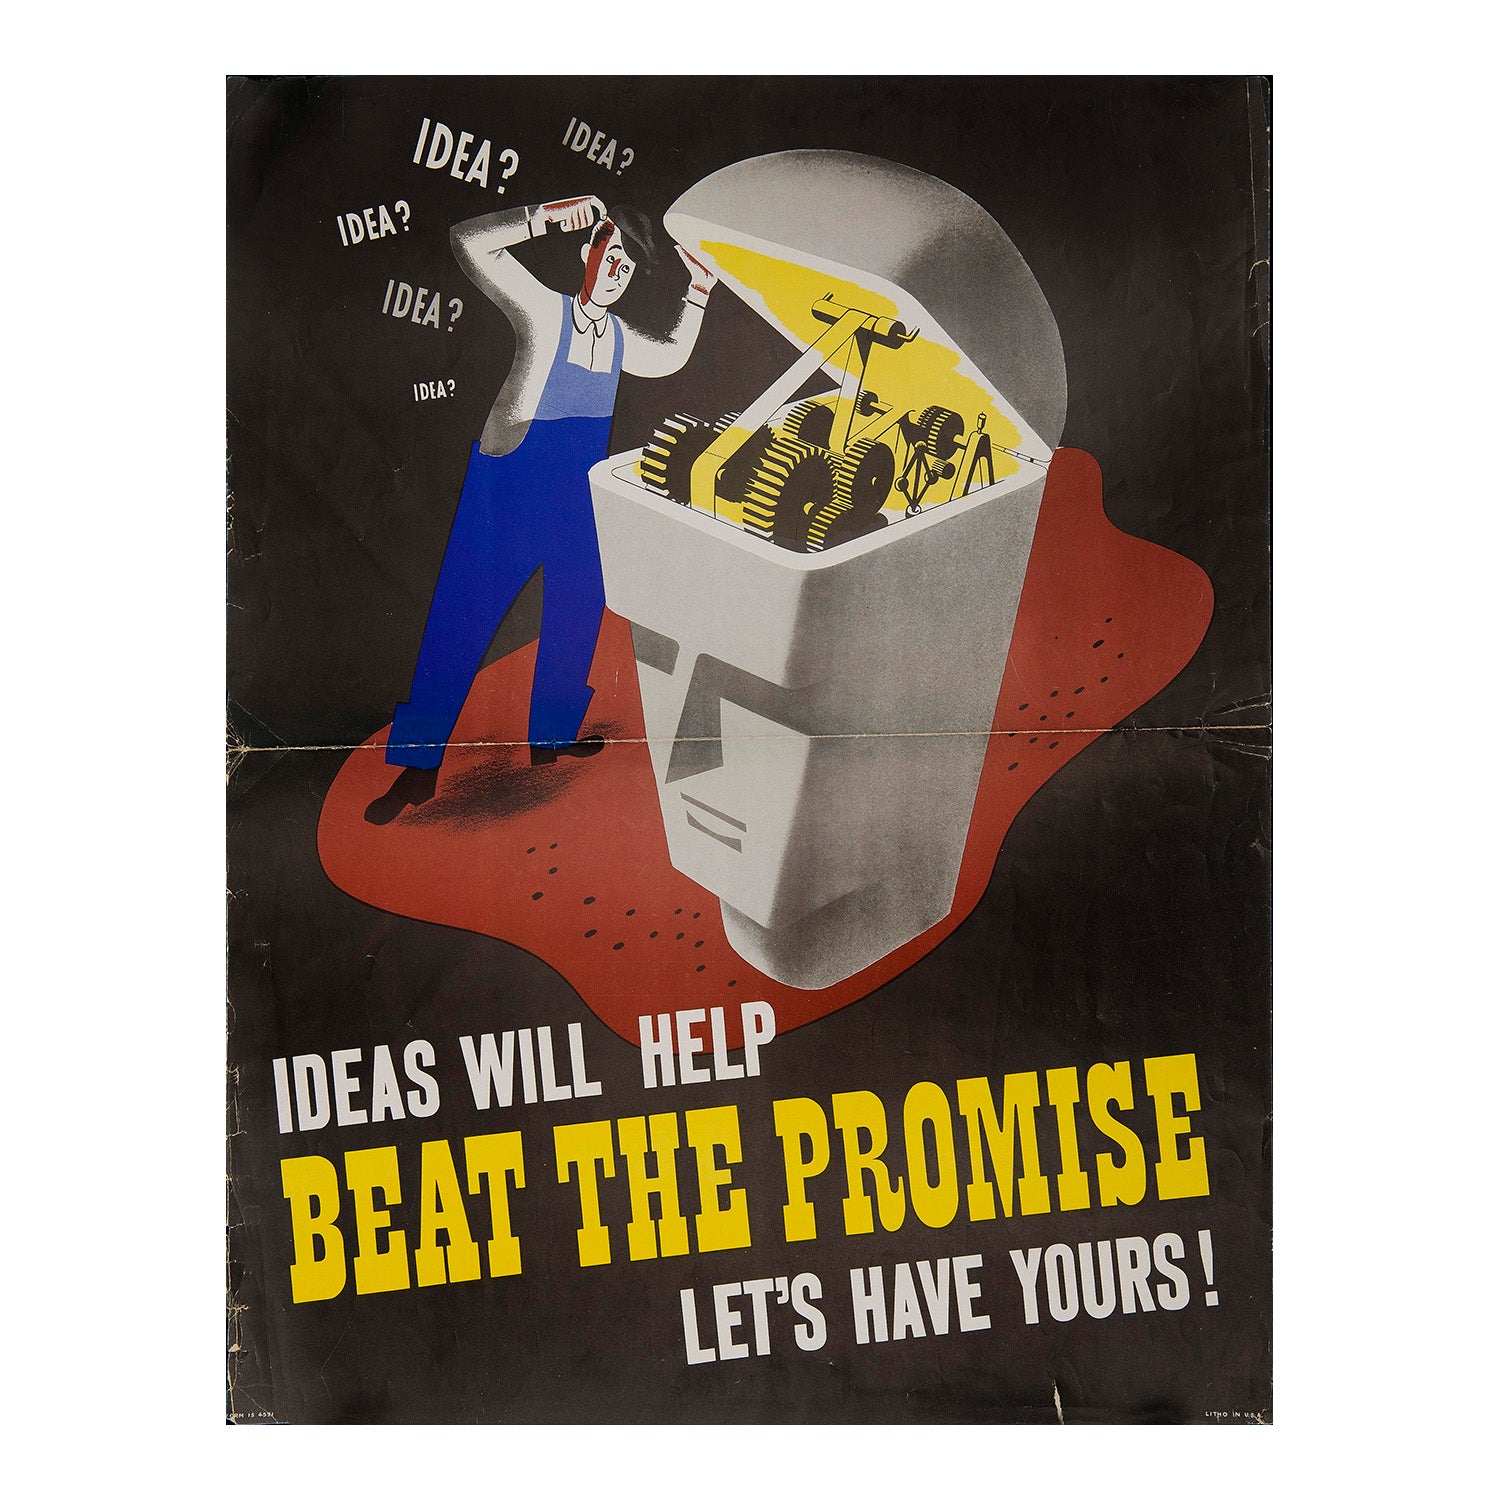 Ideas will help beat the promise. Lets have yours!